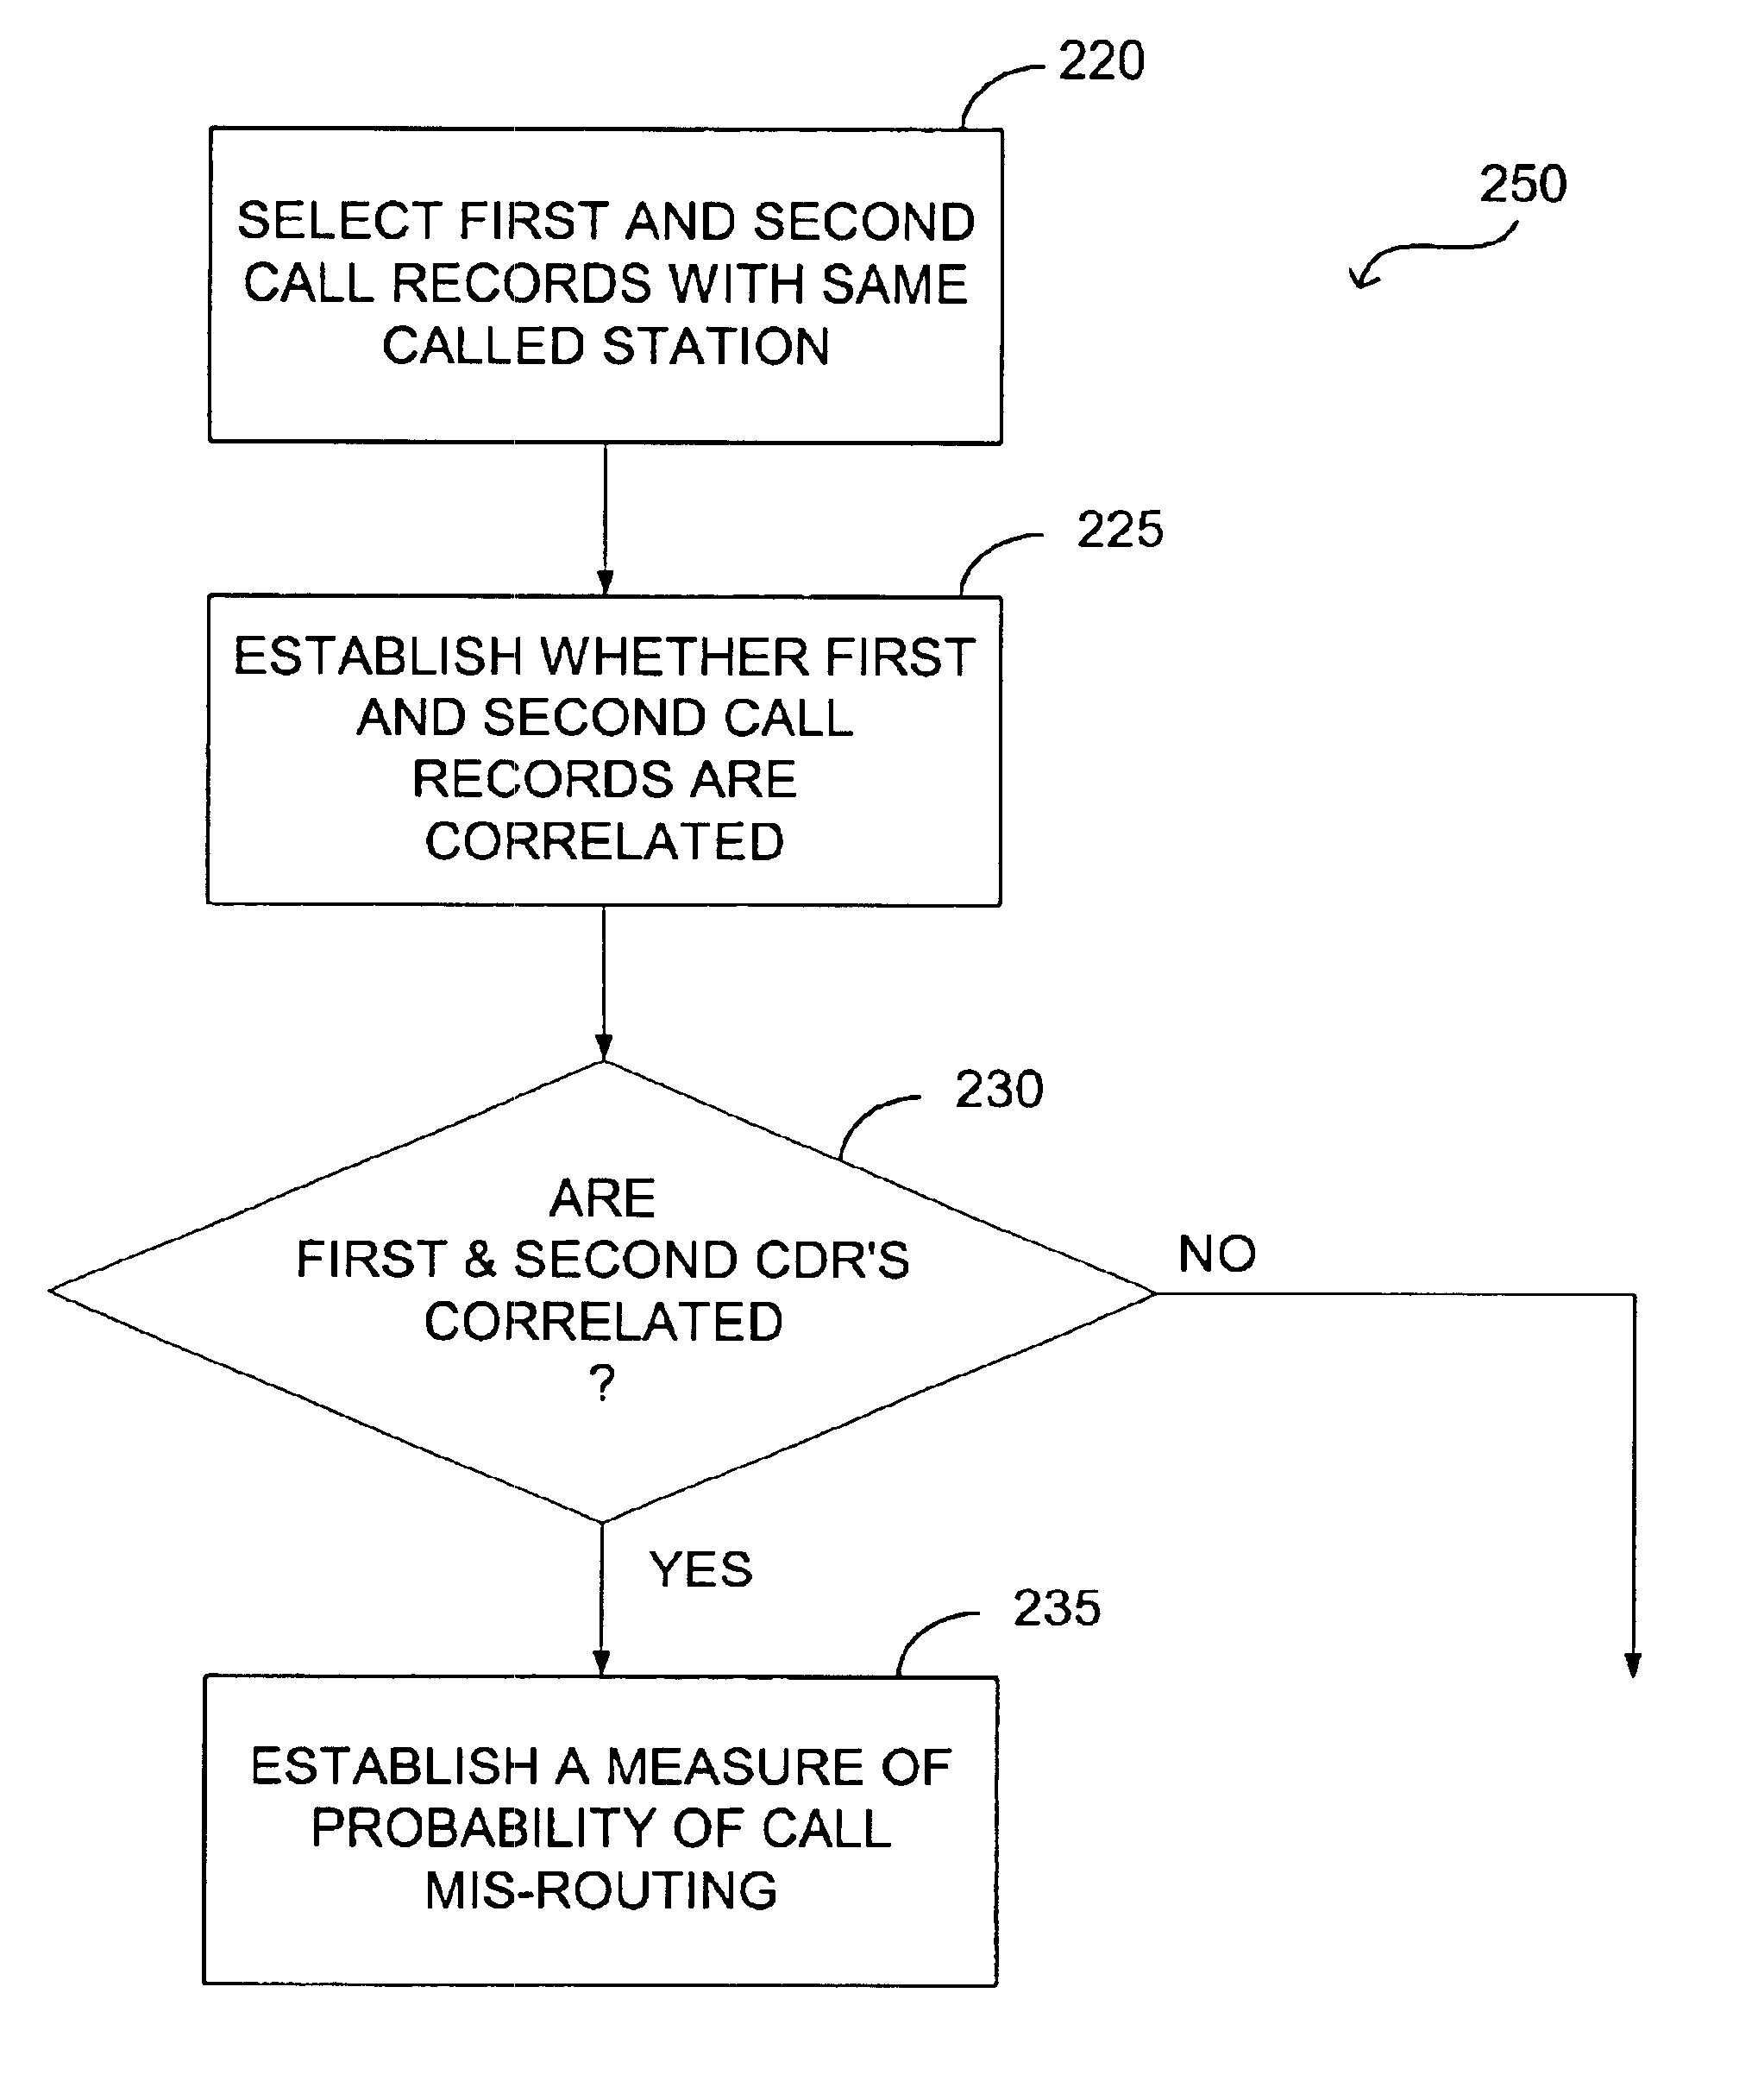 Correlation and enrichment of telephone system call data records